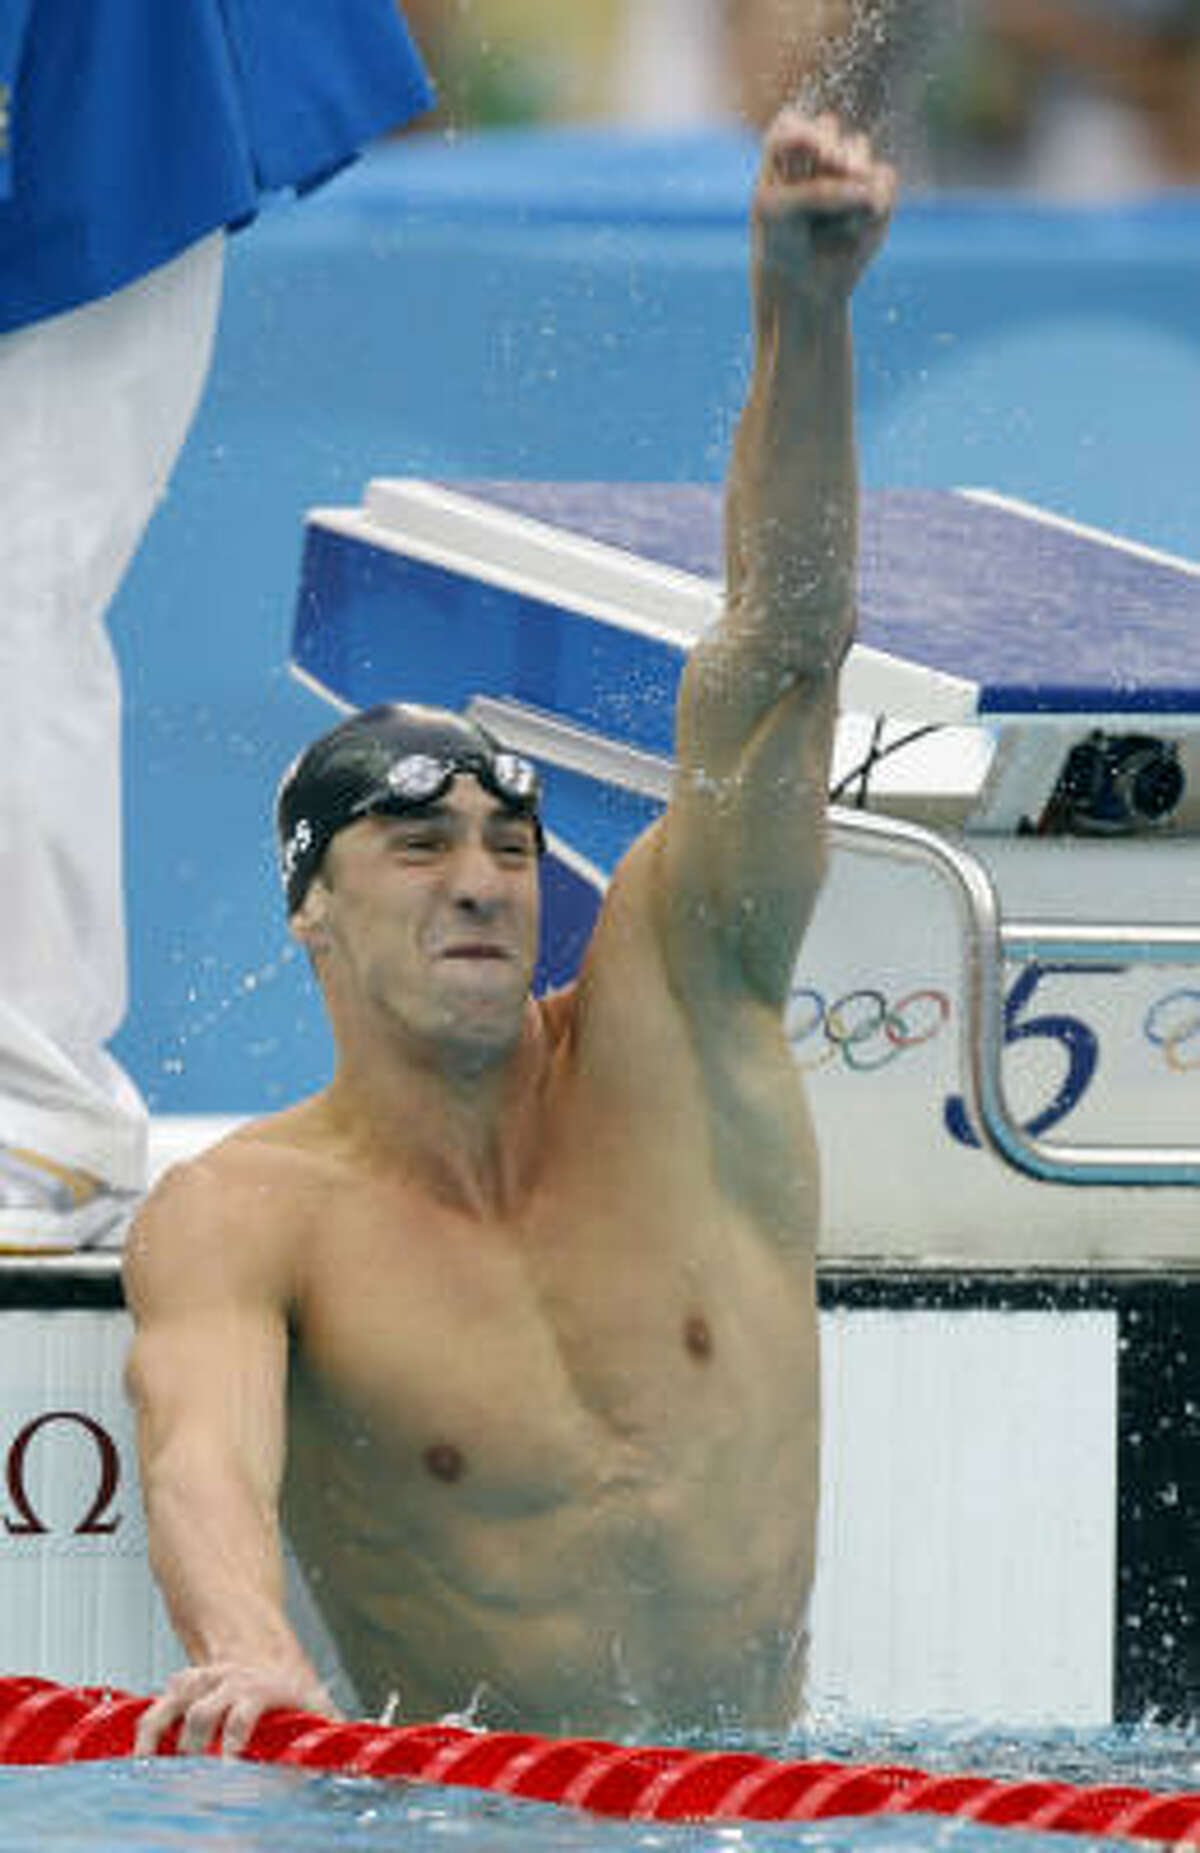 Aug. 16: Michael Phelps reacts after winning the men's 100 Butterfly, claiming his record-tying seventh gold medal in Beijing.